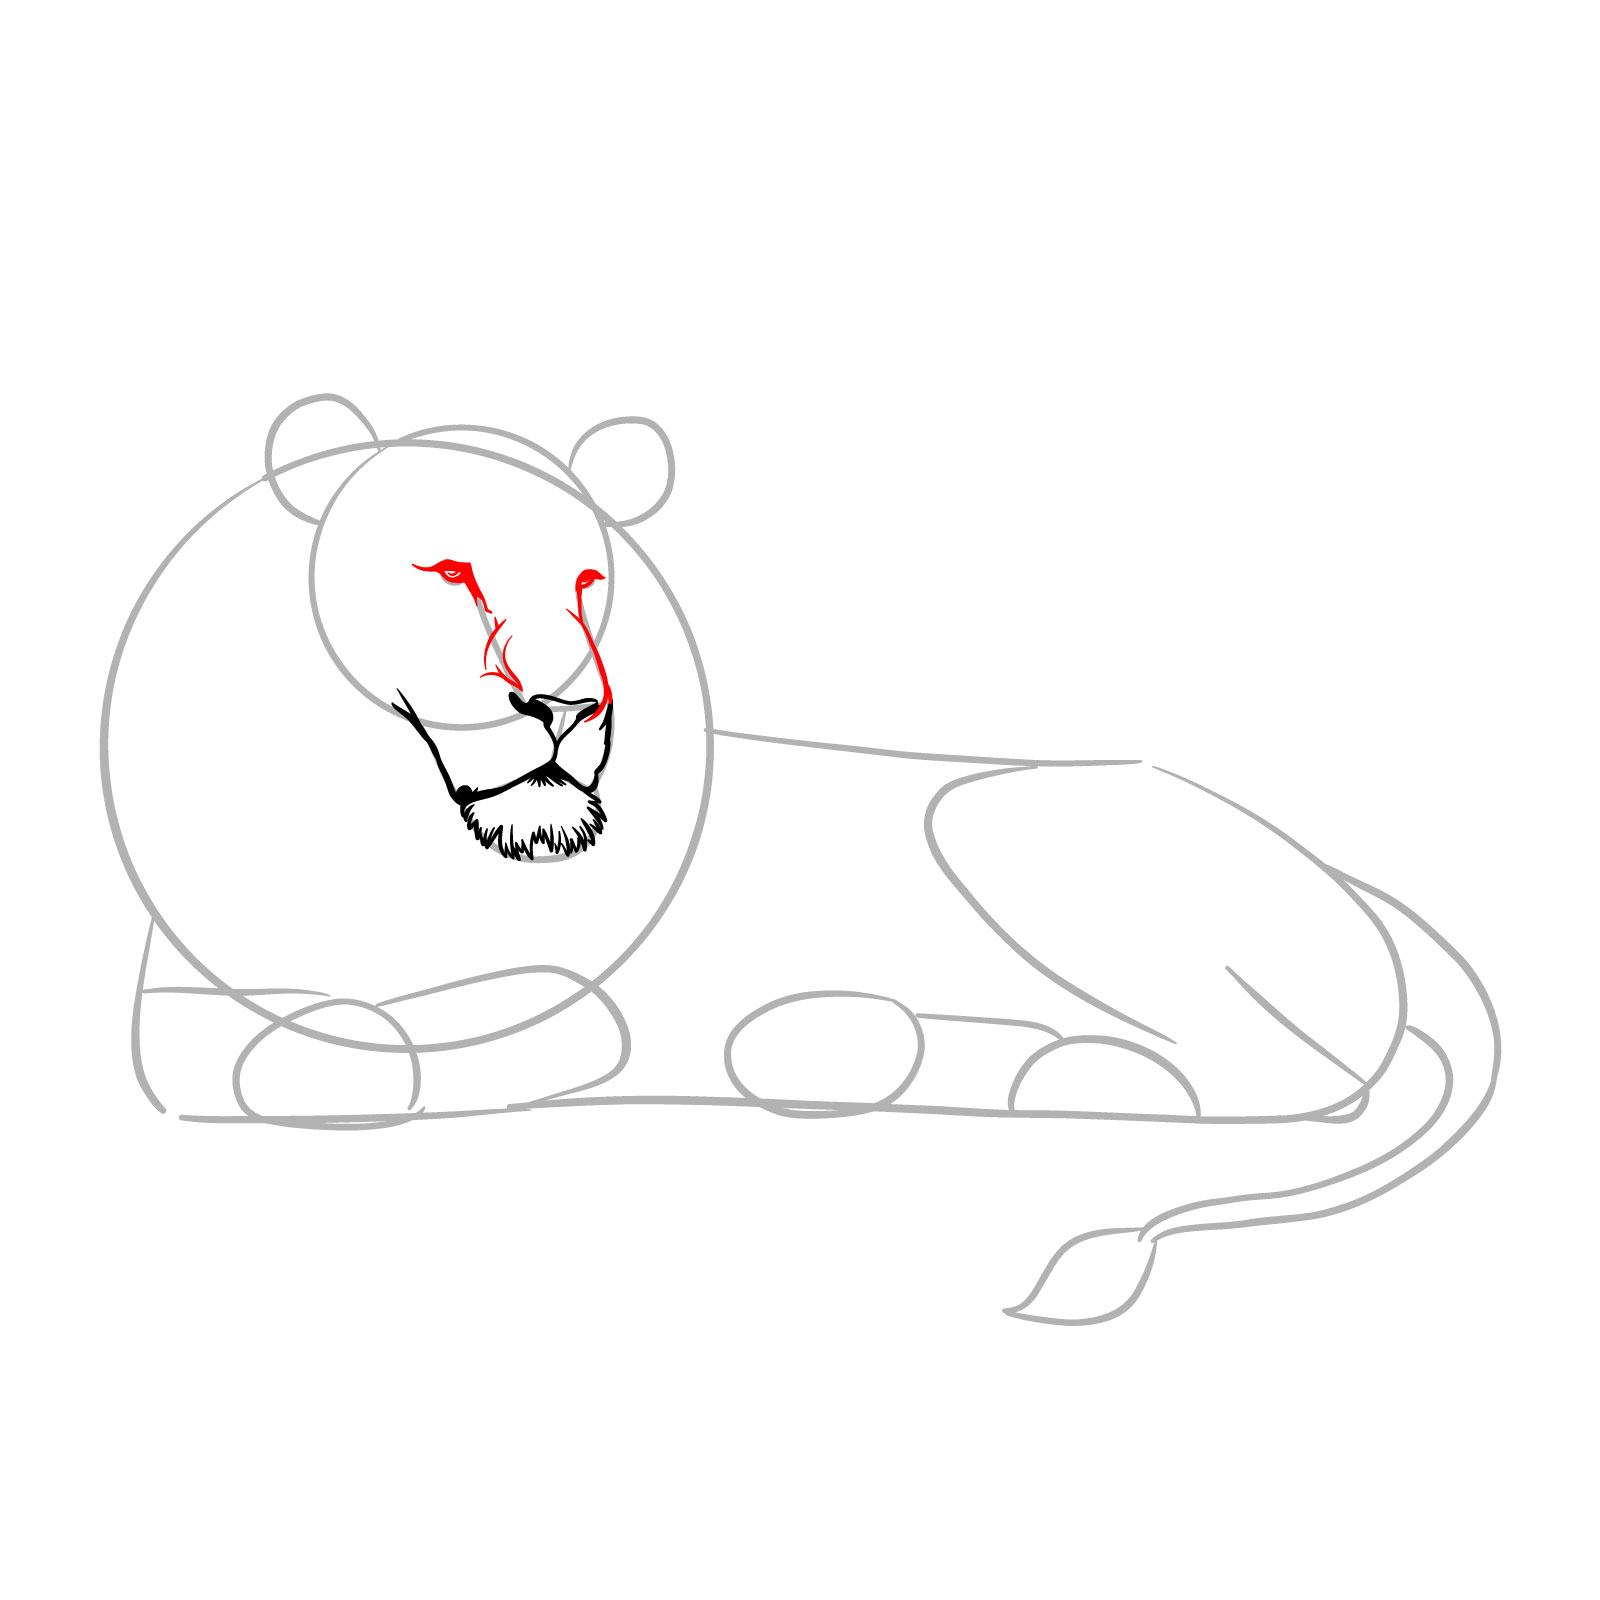 How to draw a lying lion in side view - Step 5: Detailing the eyes and nose bridge